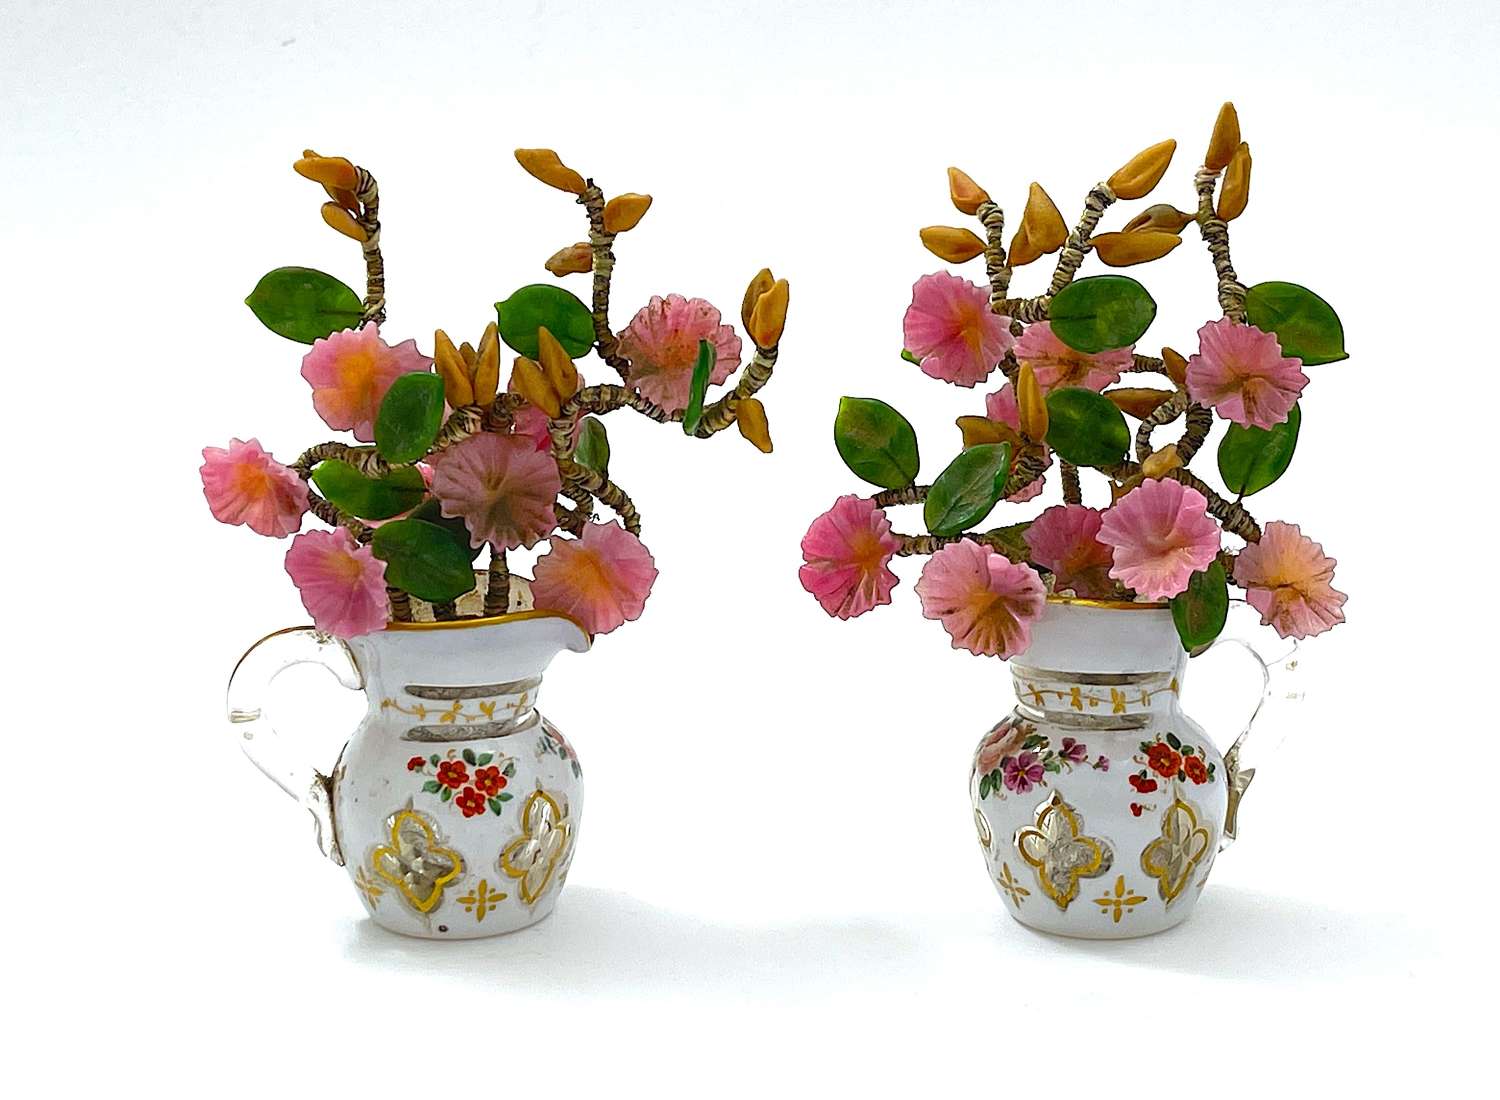 Rare Pair of Antique Miniature Overlay Glass Vases with Flower Display